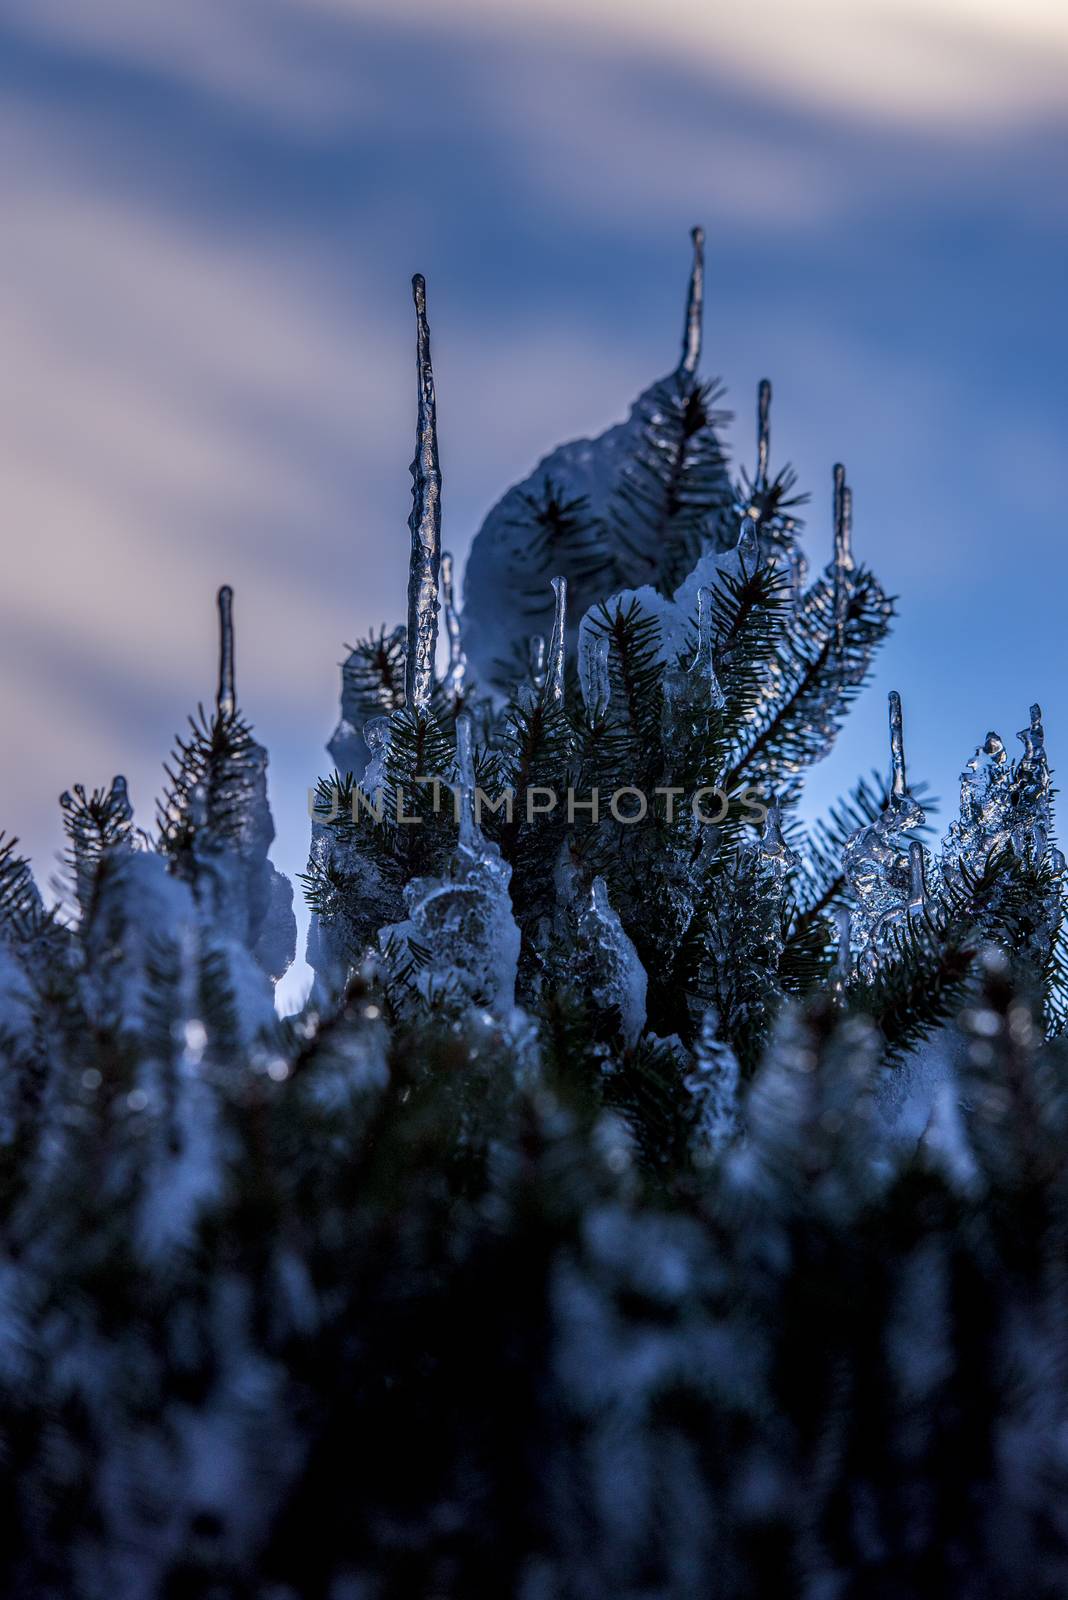 Spruce branches covered with snow and ice. Droplets of ice frozen on spruce needles and twigs, selective focus.